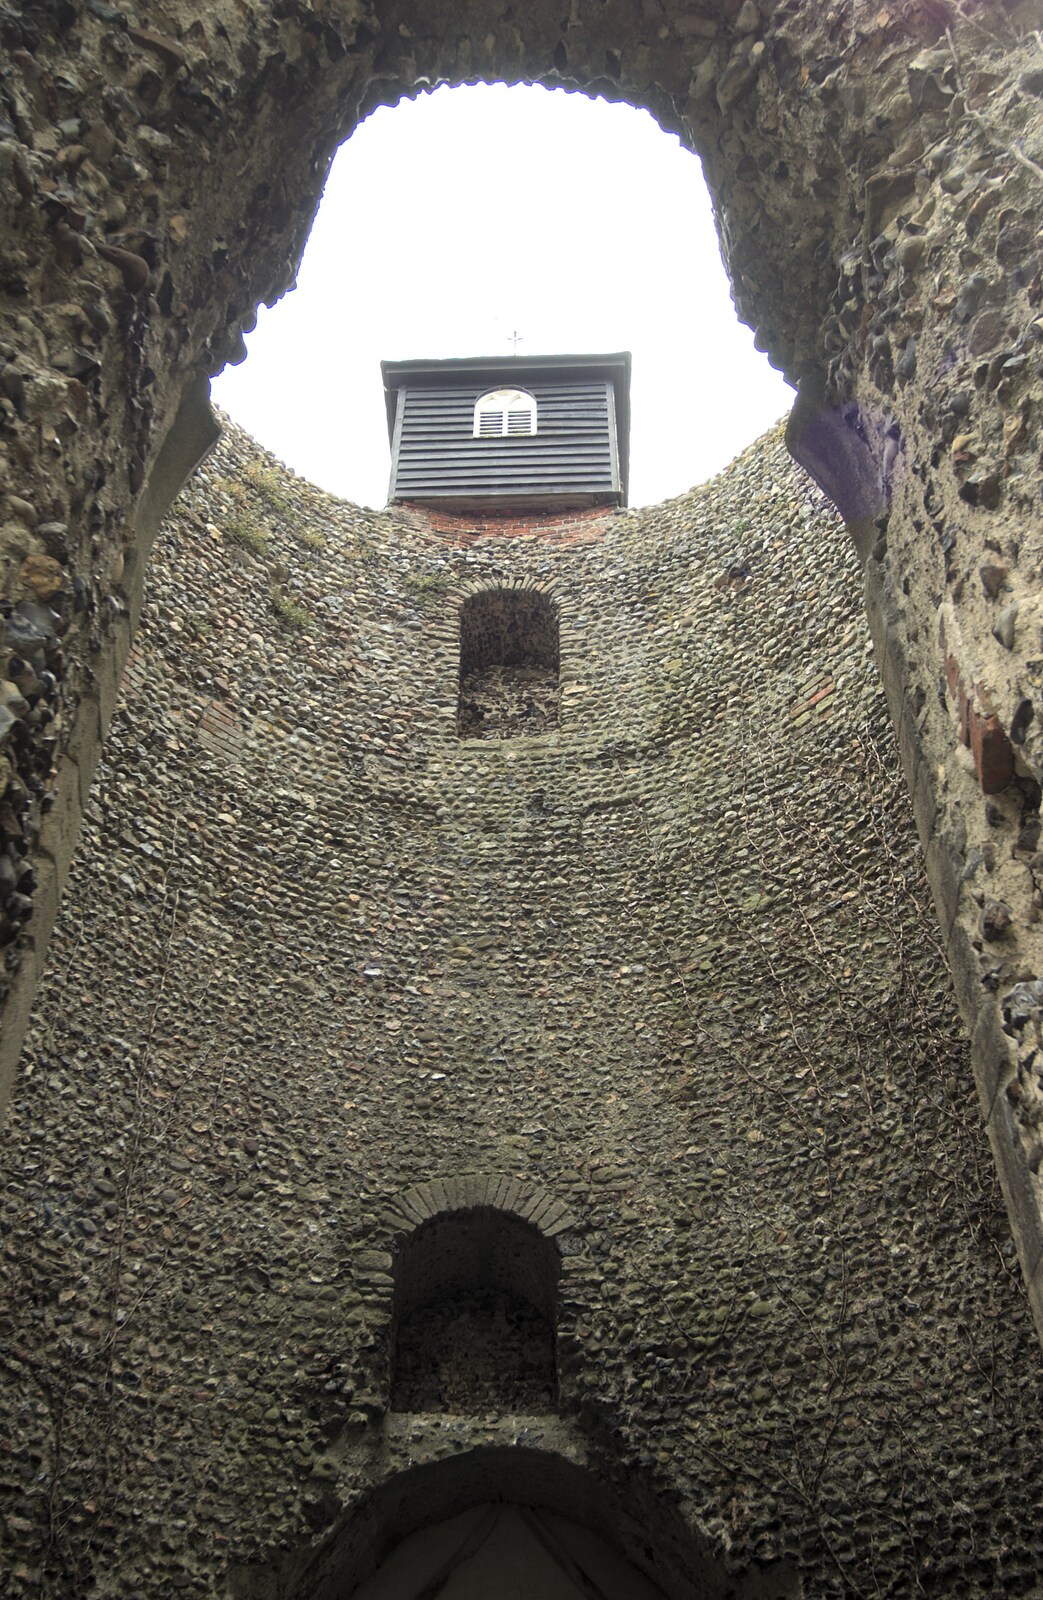 A view up the collapsed round tower from A Christening at St. Mary's Church, Wortham, Suffolk - 12th June 2011